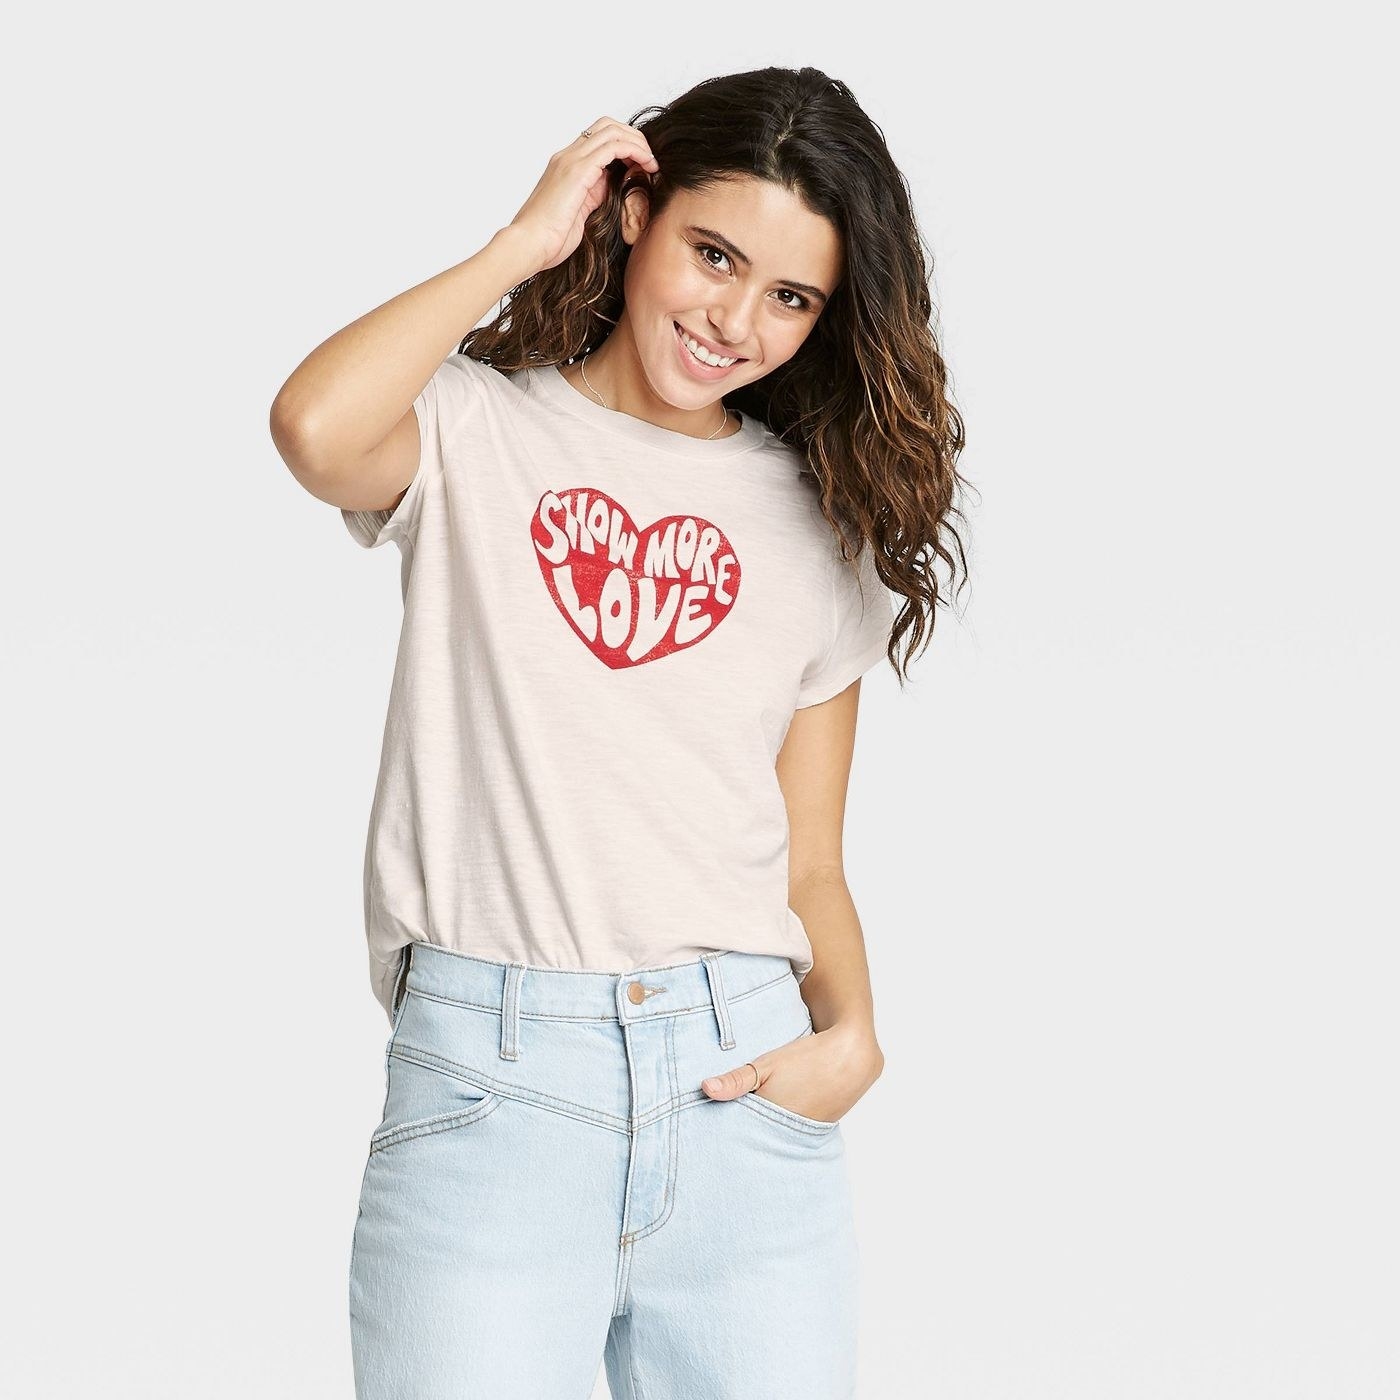 A model wearing a white T-shirt with a red heart